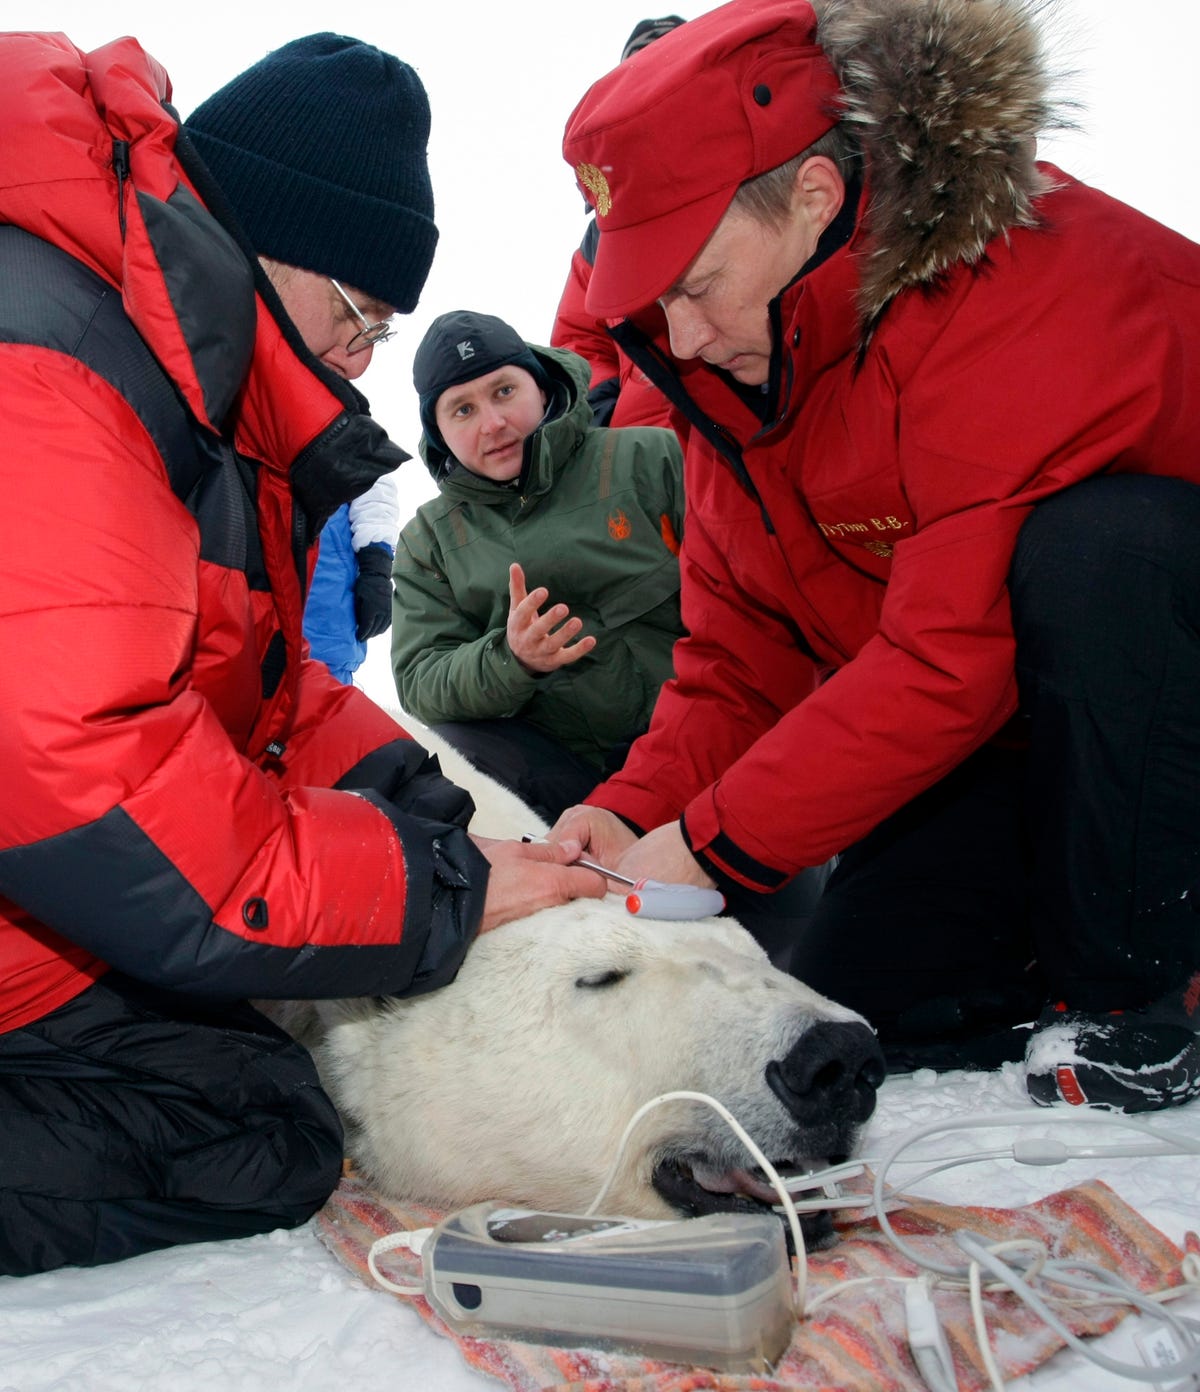 hes-also-shot-a-polar-bear-for-science-this-allowed-researchers-to-tag-and-track-the-arctic-bear.jpg